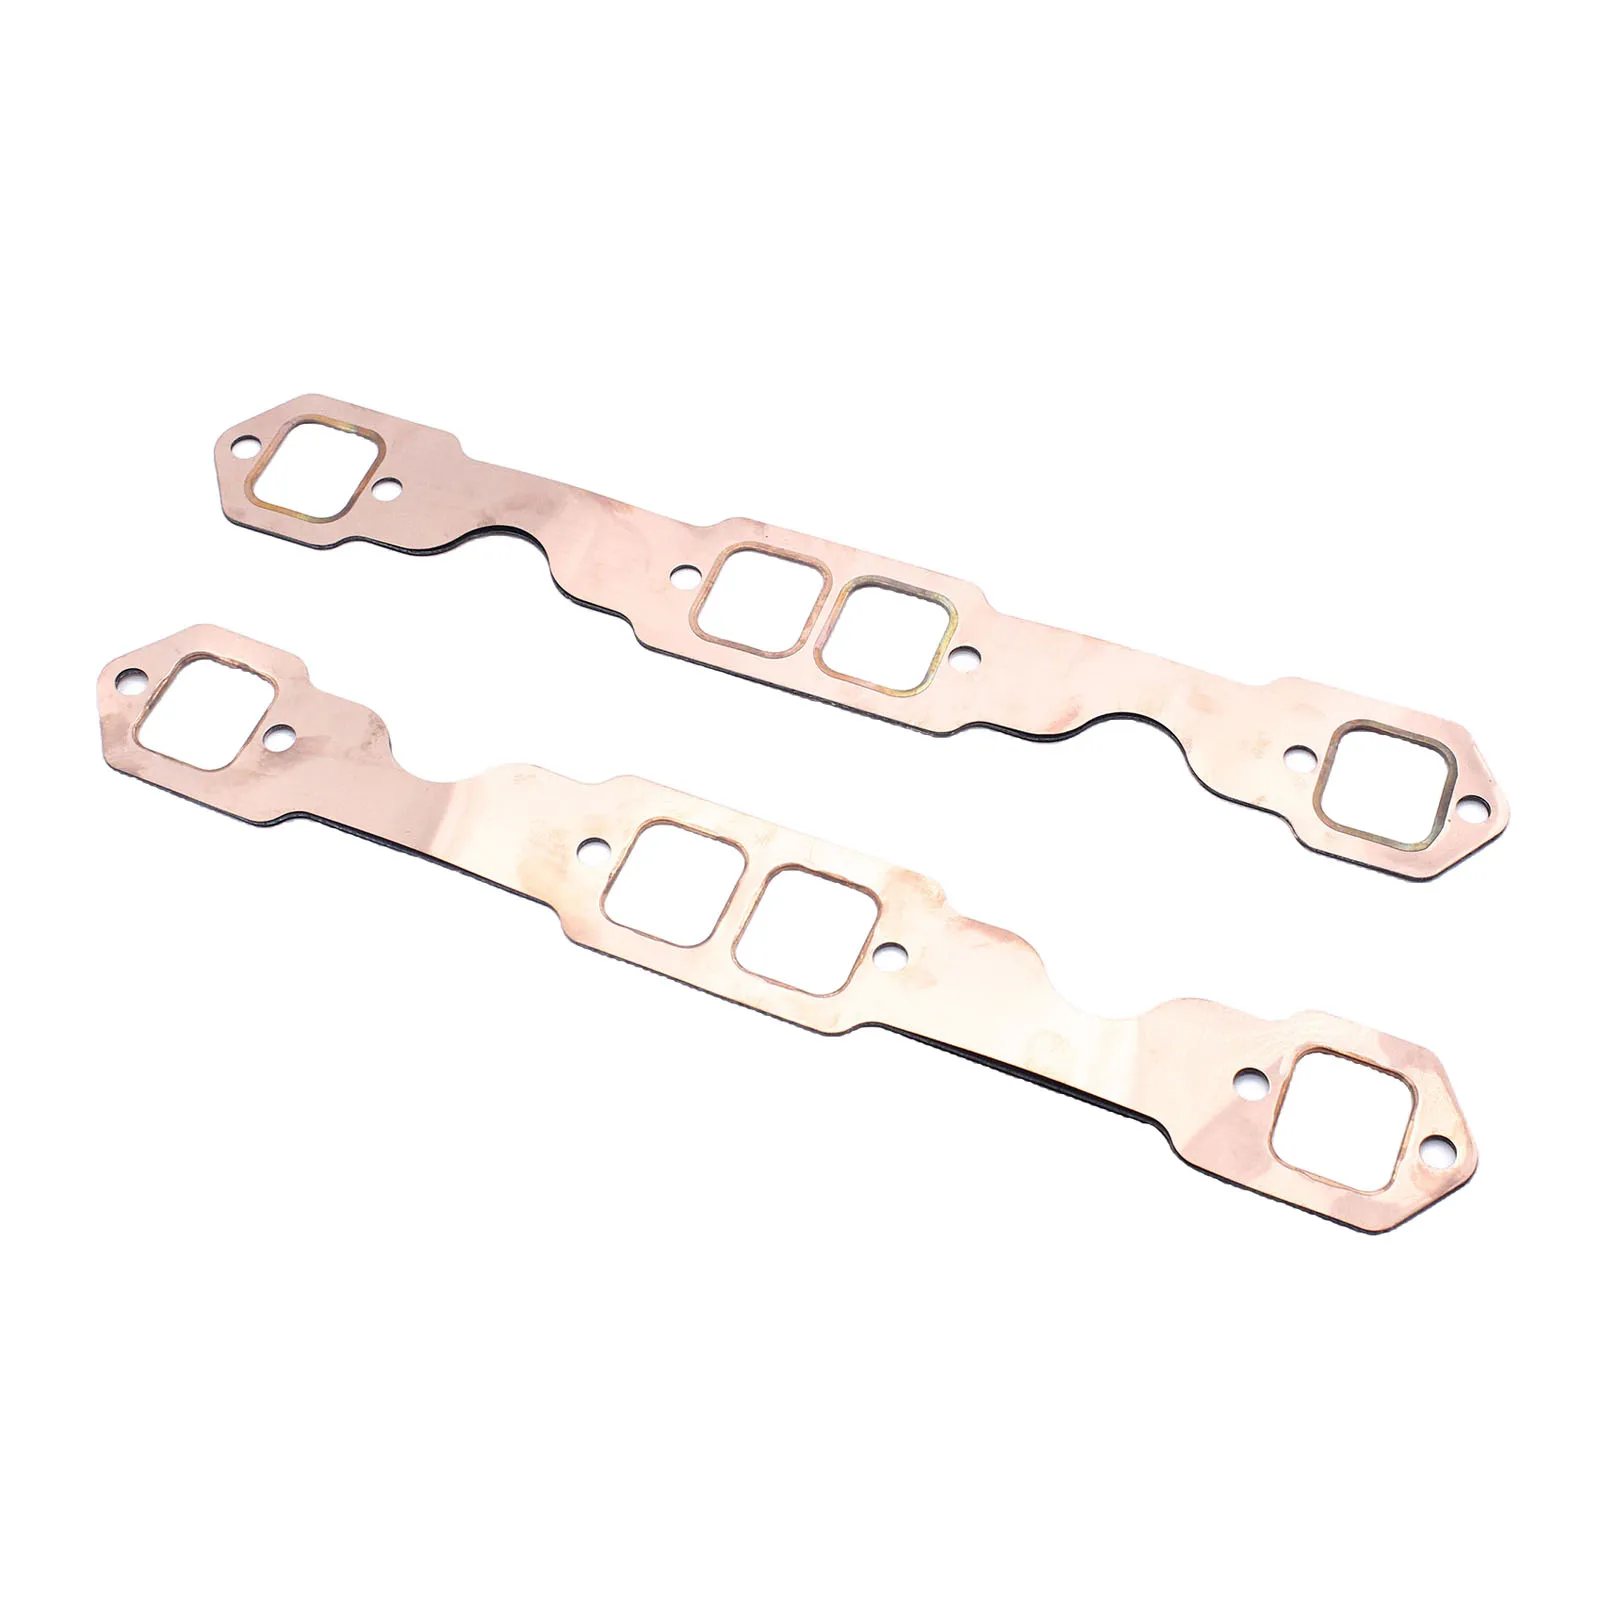 LucaSng A Pair SBC Oval Port Copper Header Exhaust Gasket Seal for Chevy SB 327 305 350 383 Reusable Exhaust Manifold Gasket Set 